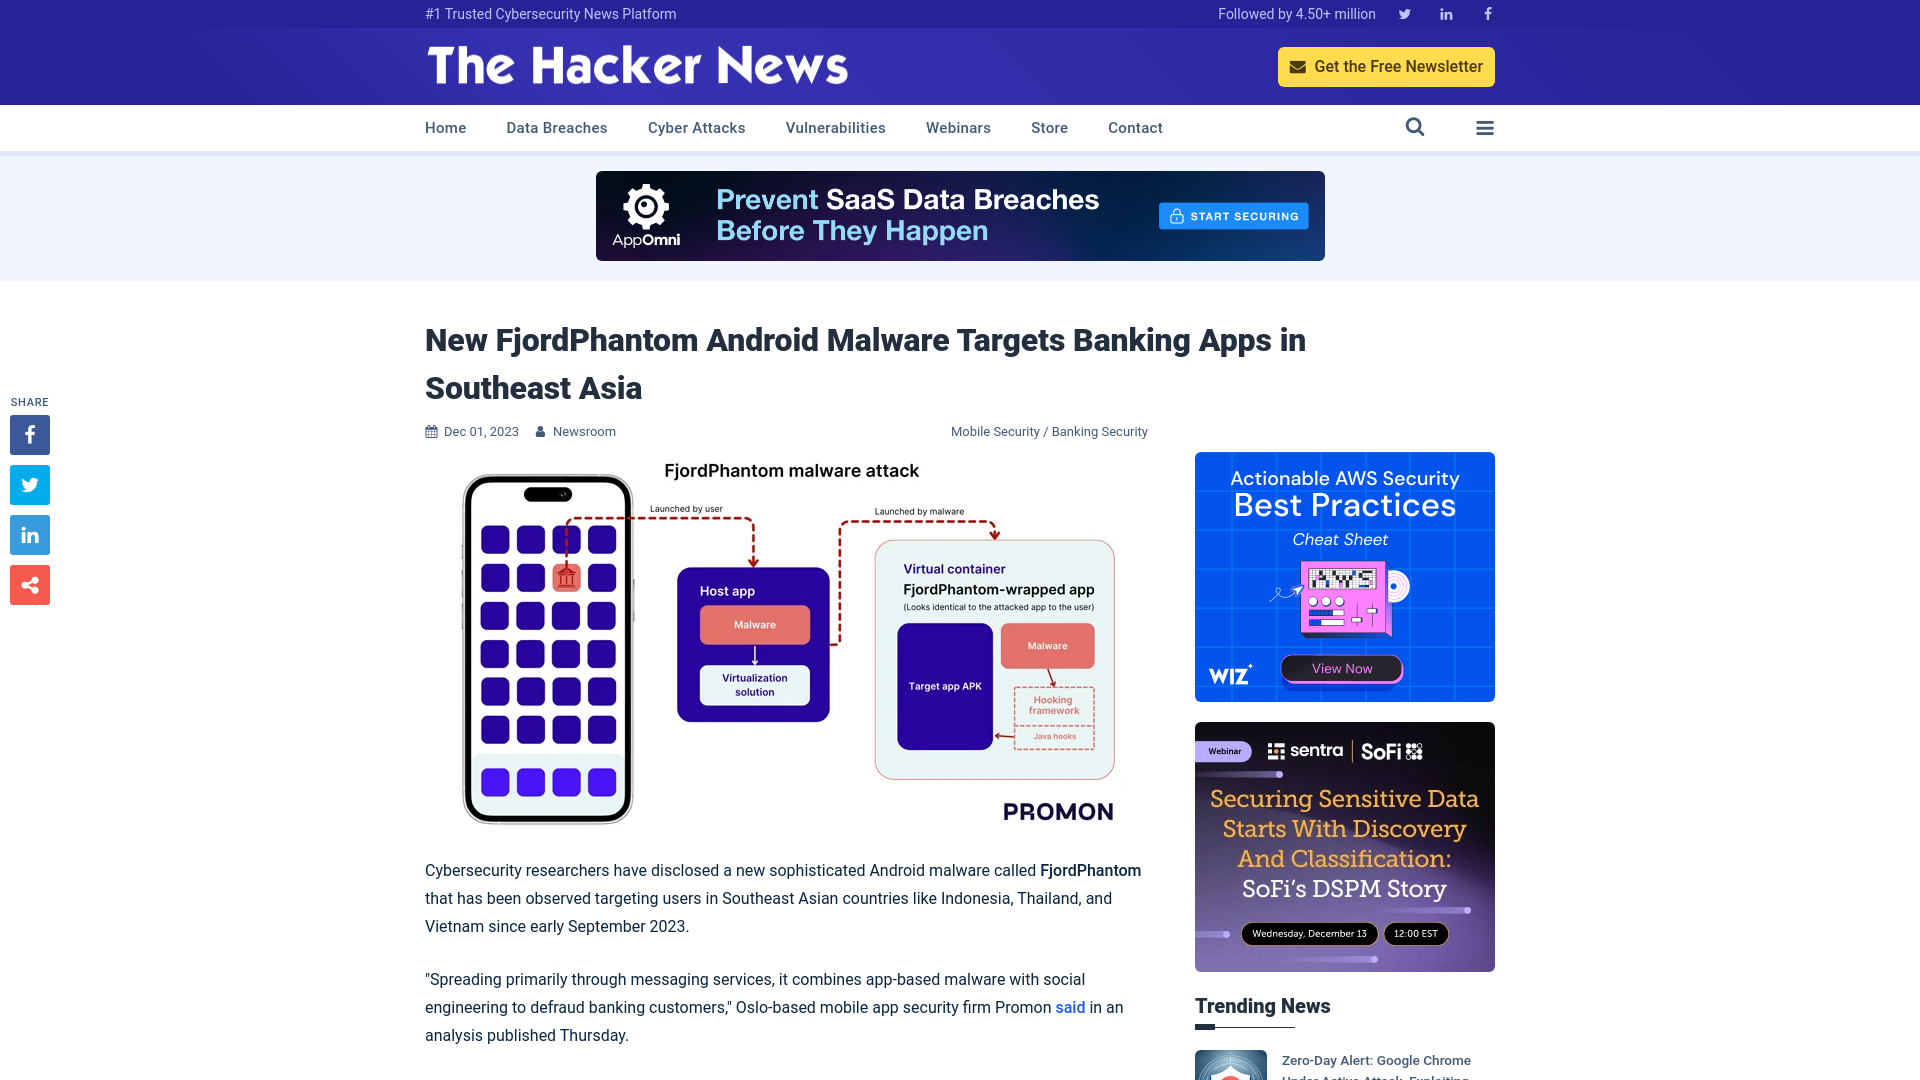 New FjordPhantom Android Malware Targets Banking Apps in Southeast Asia